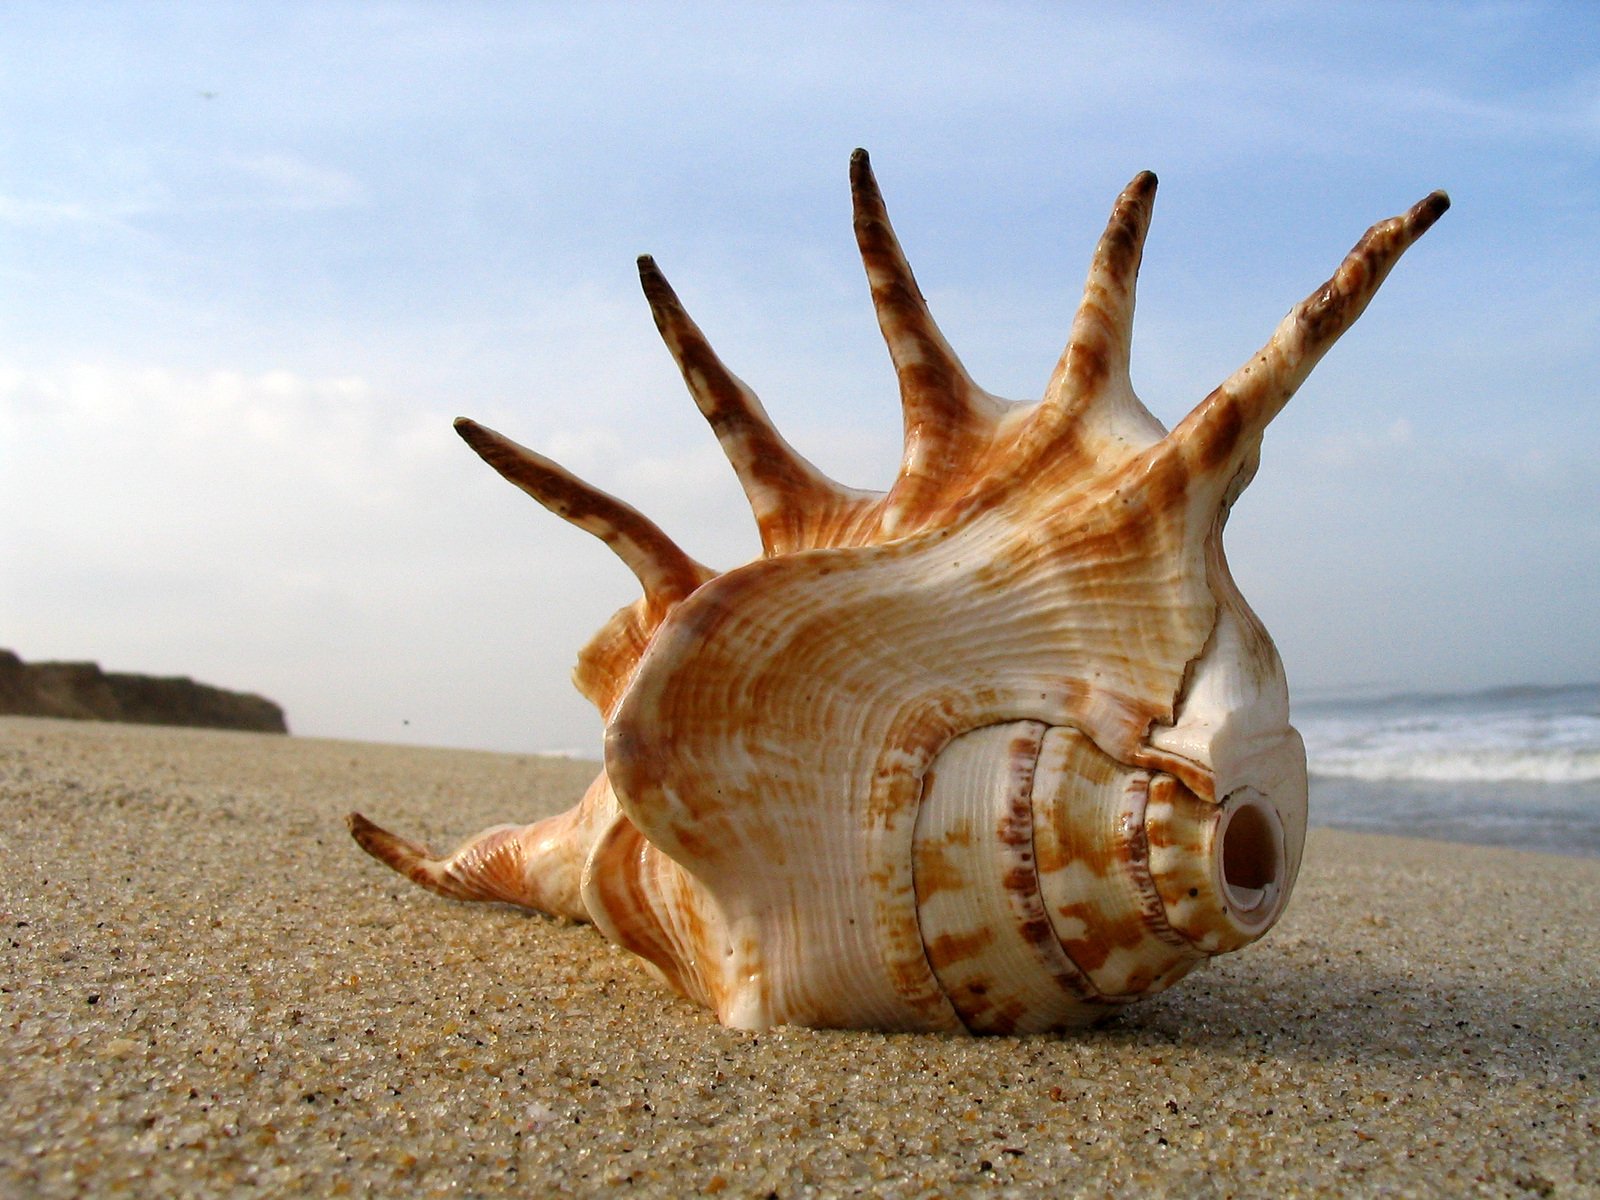 a shell that is sitting on the sand